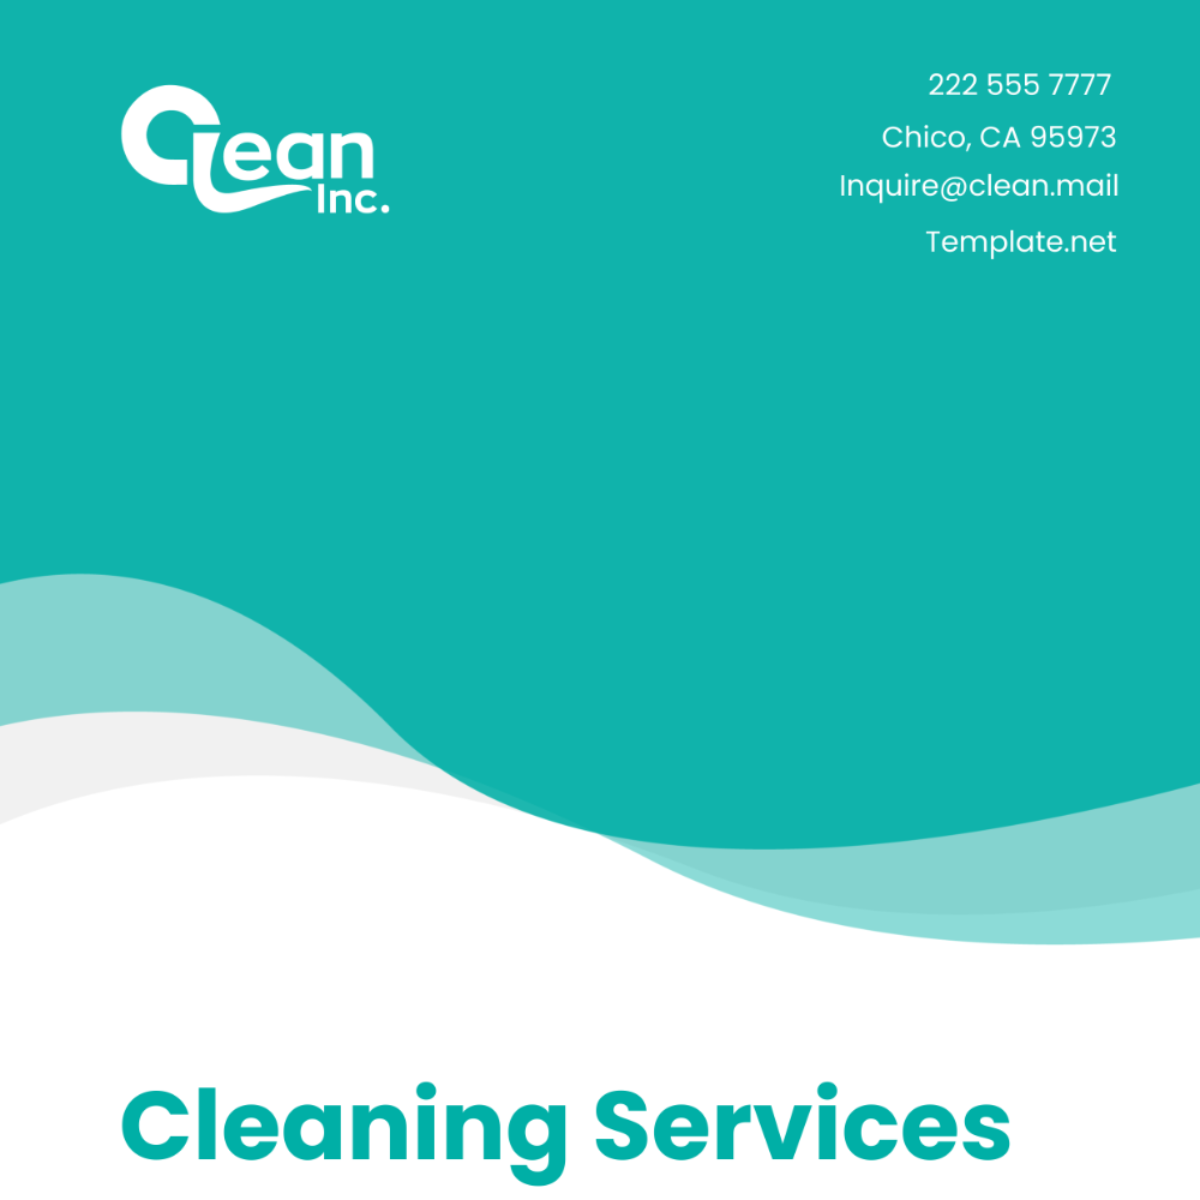 Cleaning Services Dress Code Policy Template